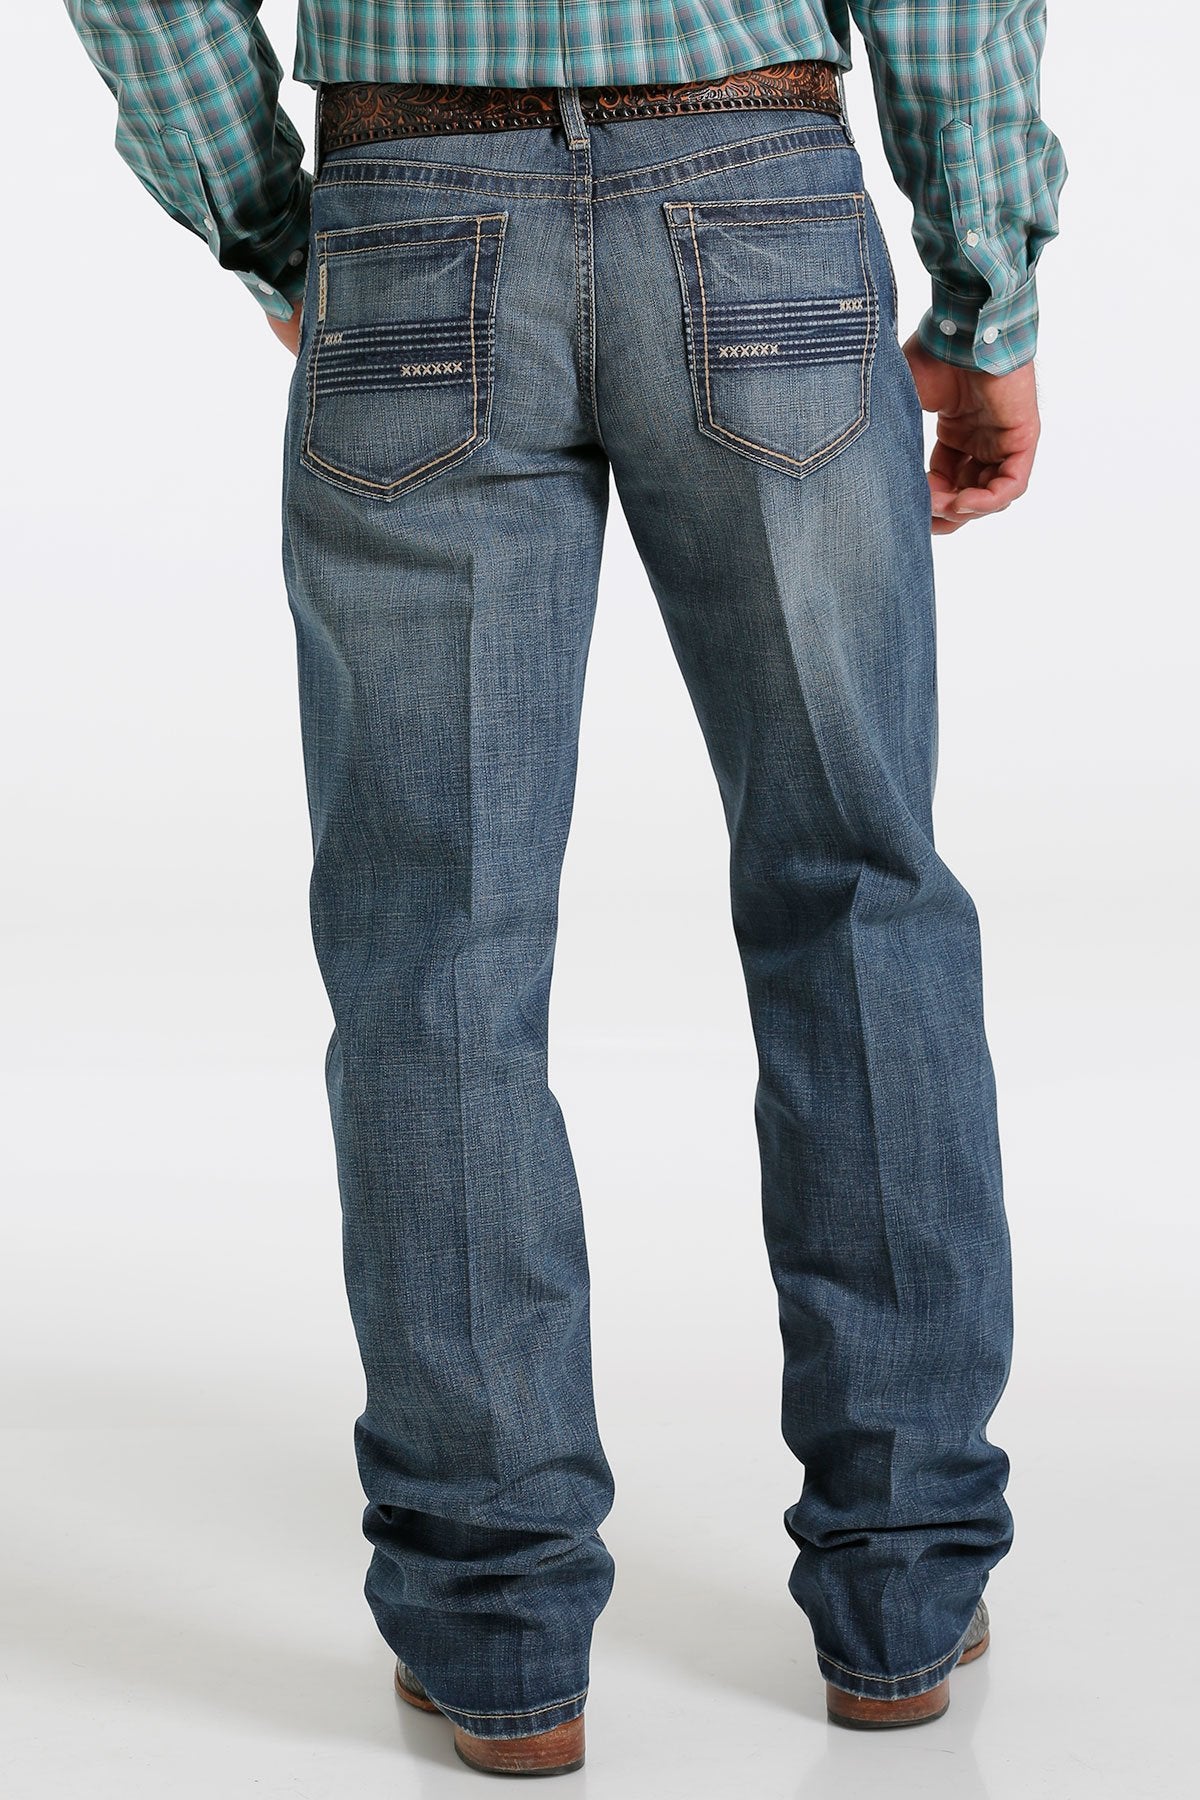 CINCH MEN'S RELAXED FIT GRANT - DARK STONEWASH - MB56937001